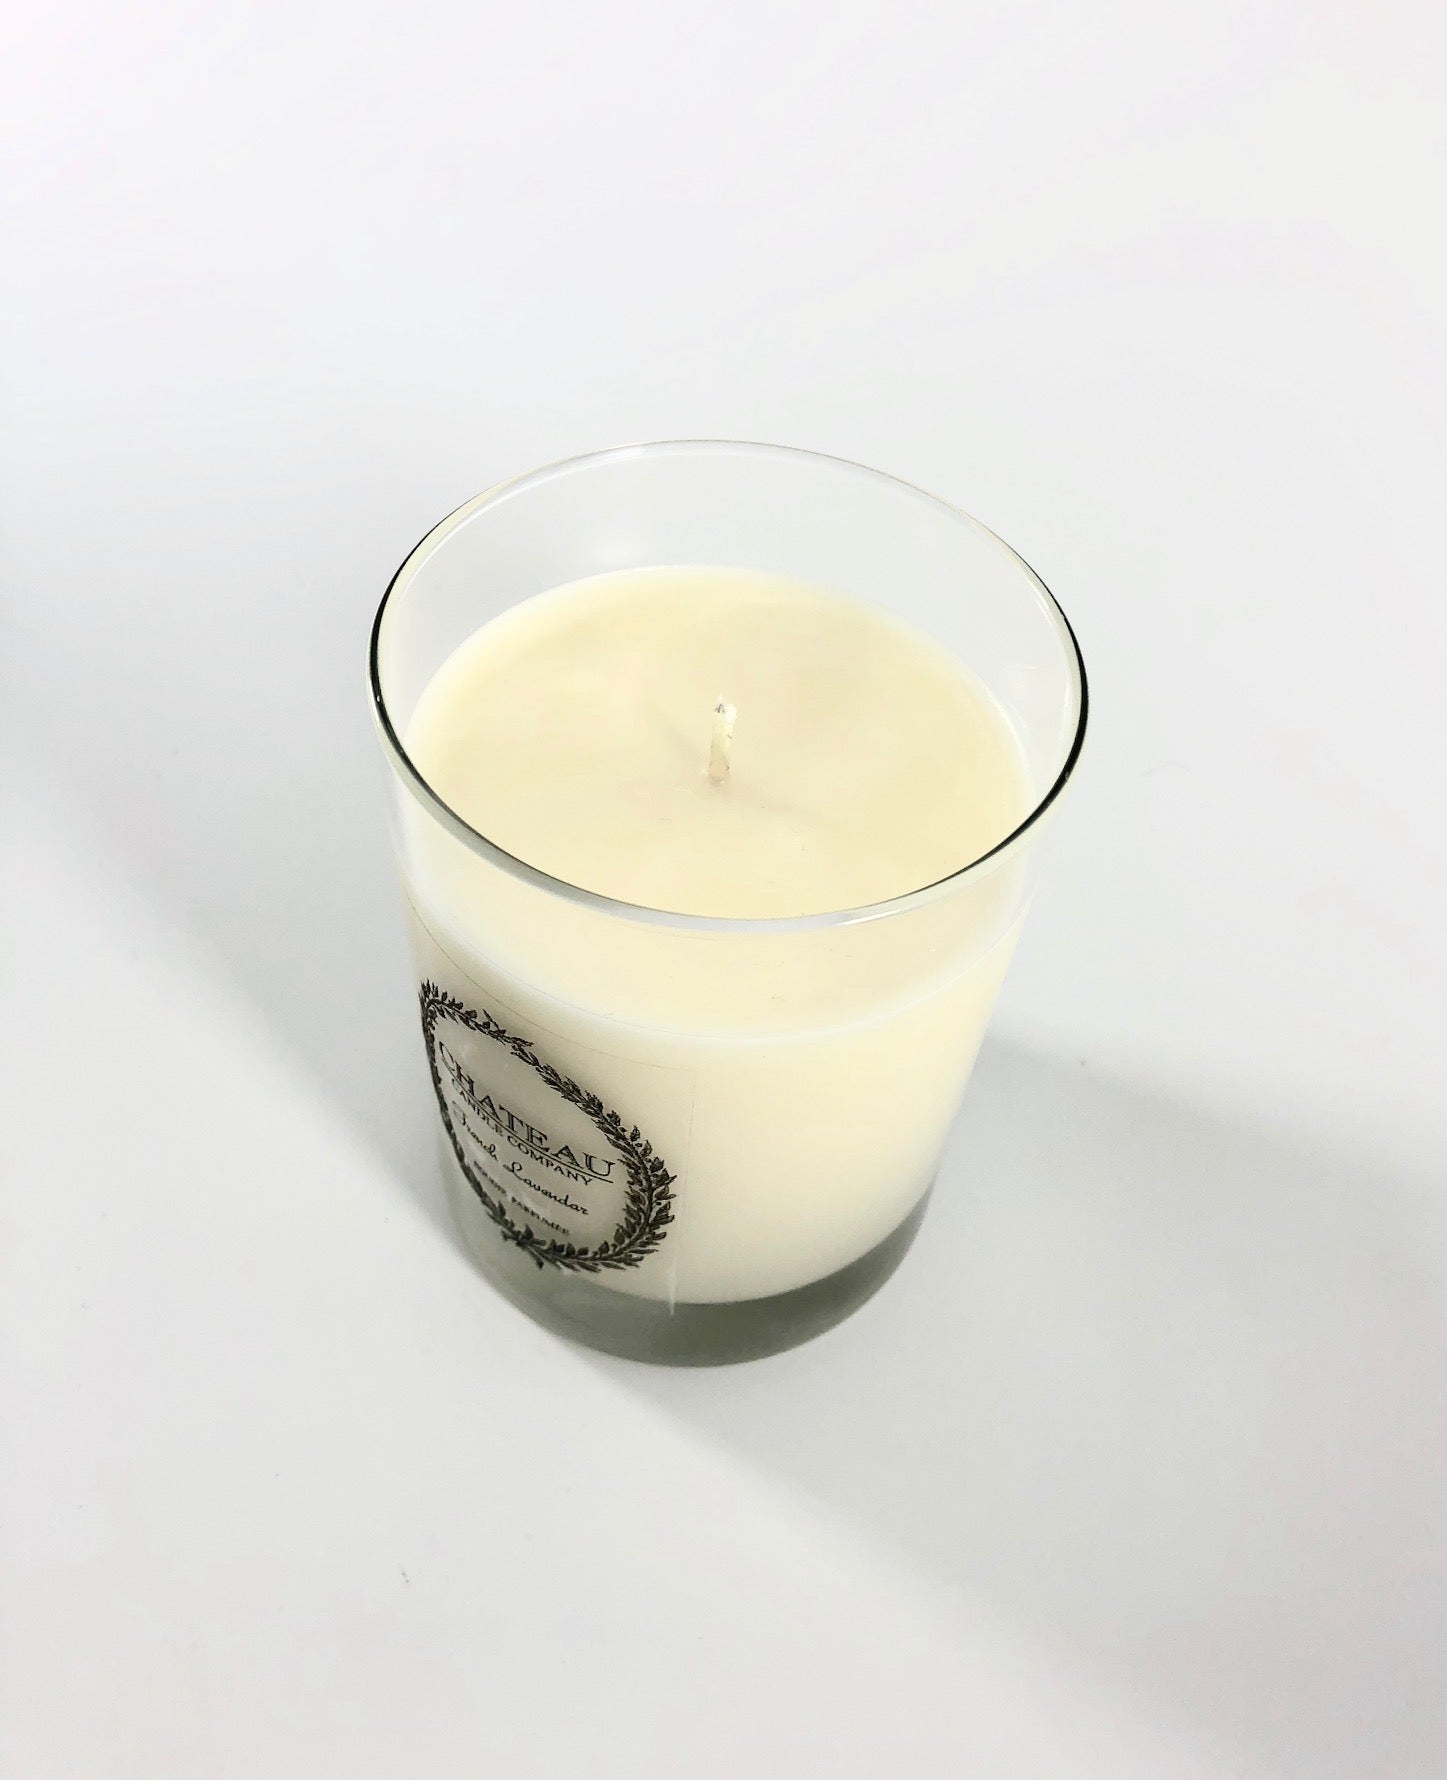 French Lavender Candle Soy Wax Vegan Candles Handmade Handcrafted